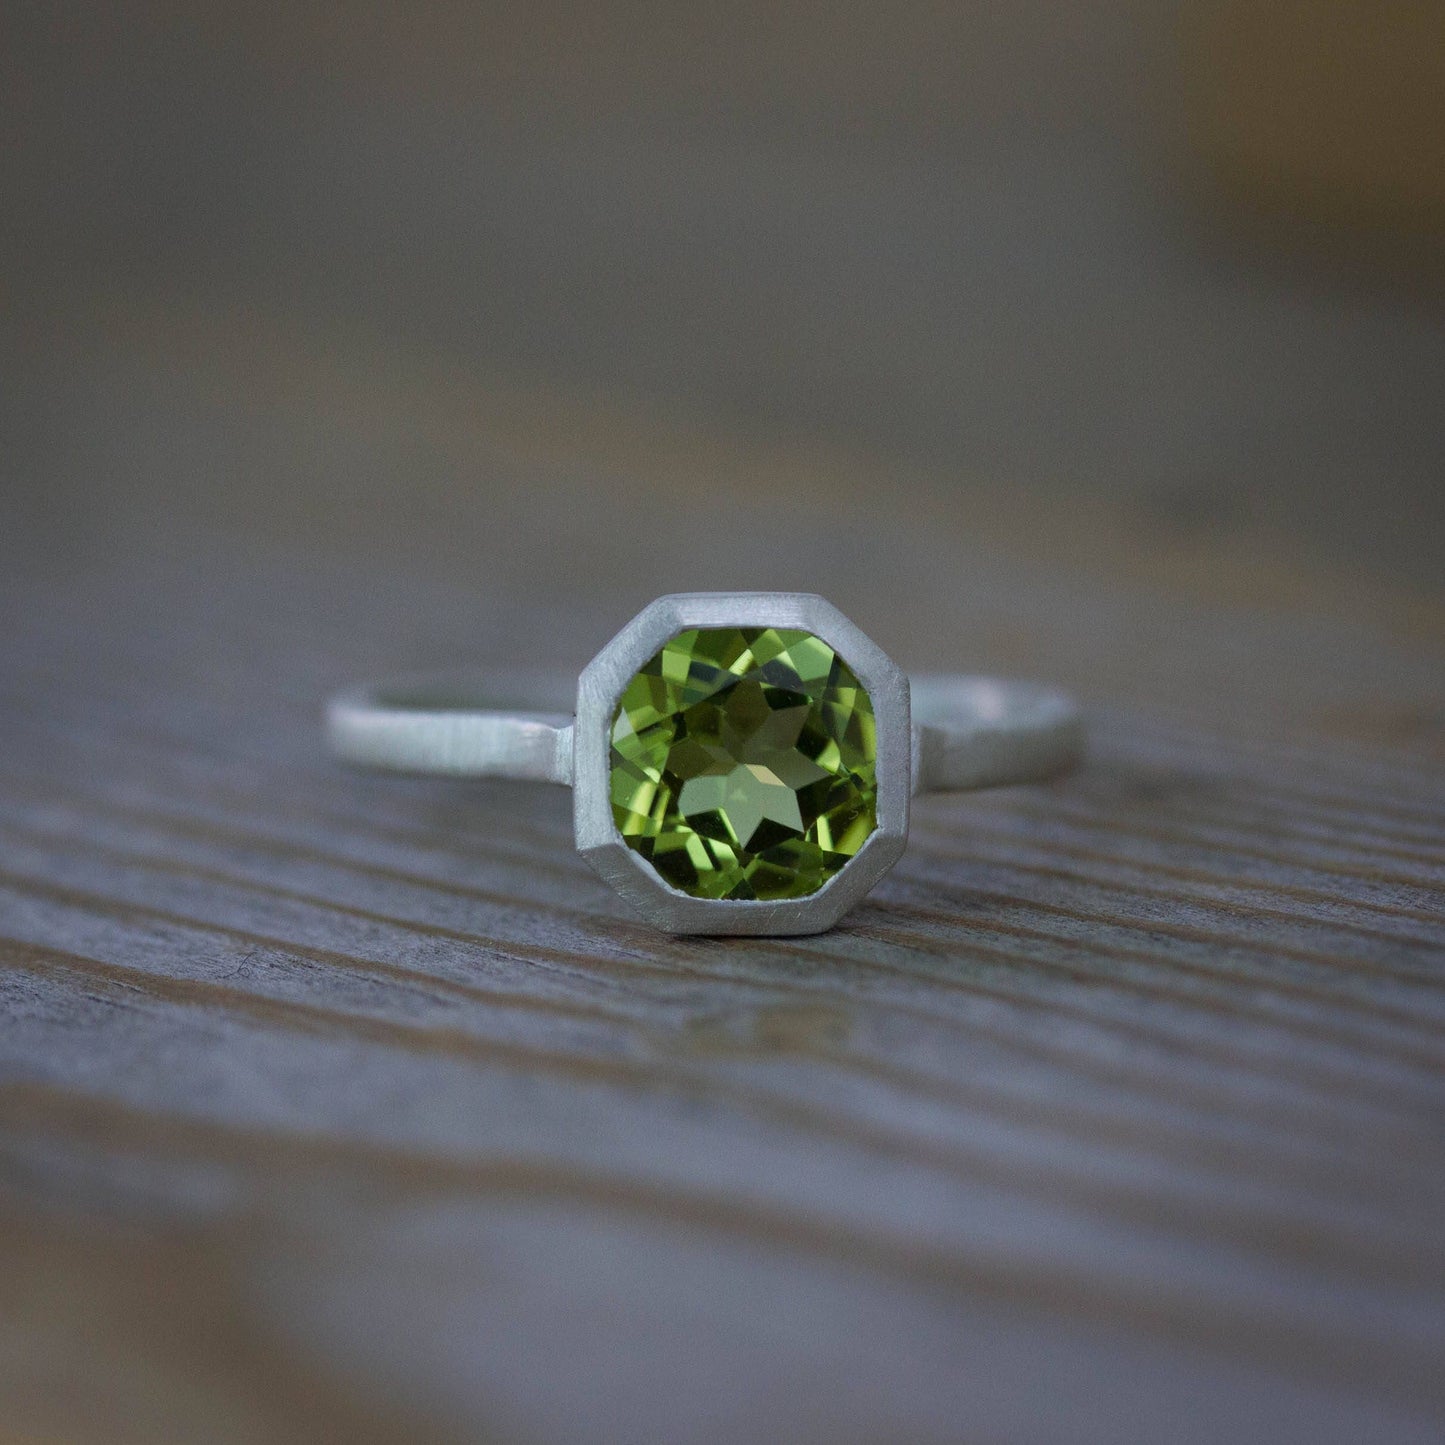 A handmade Peridot ring from Cassin Jewelry showcased on a wooden table.